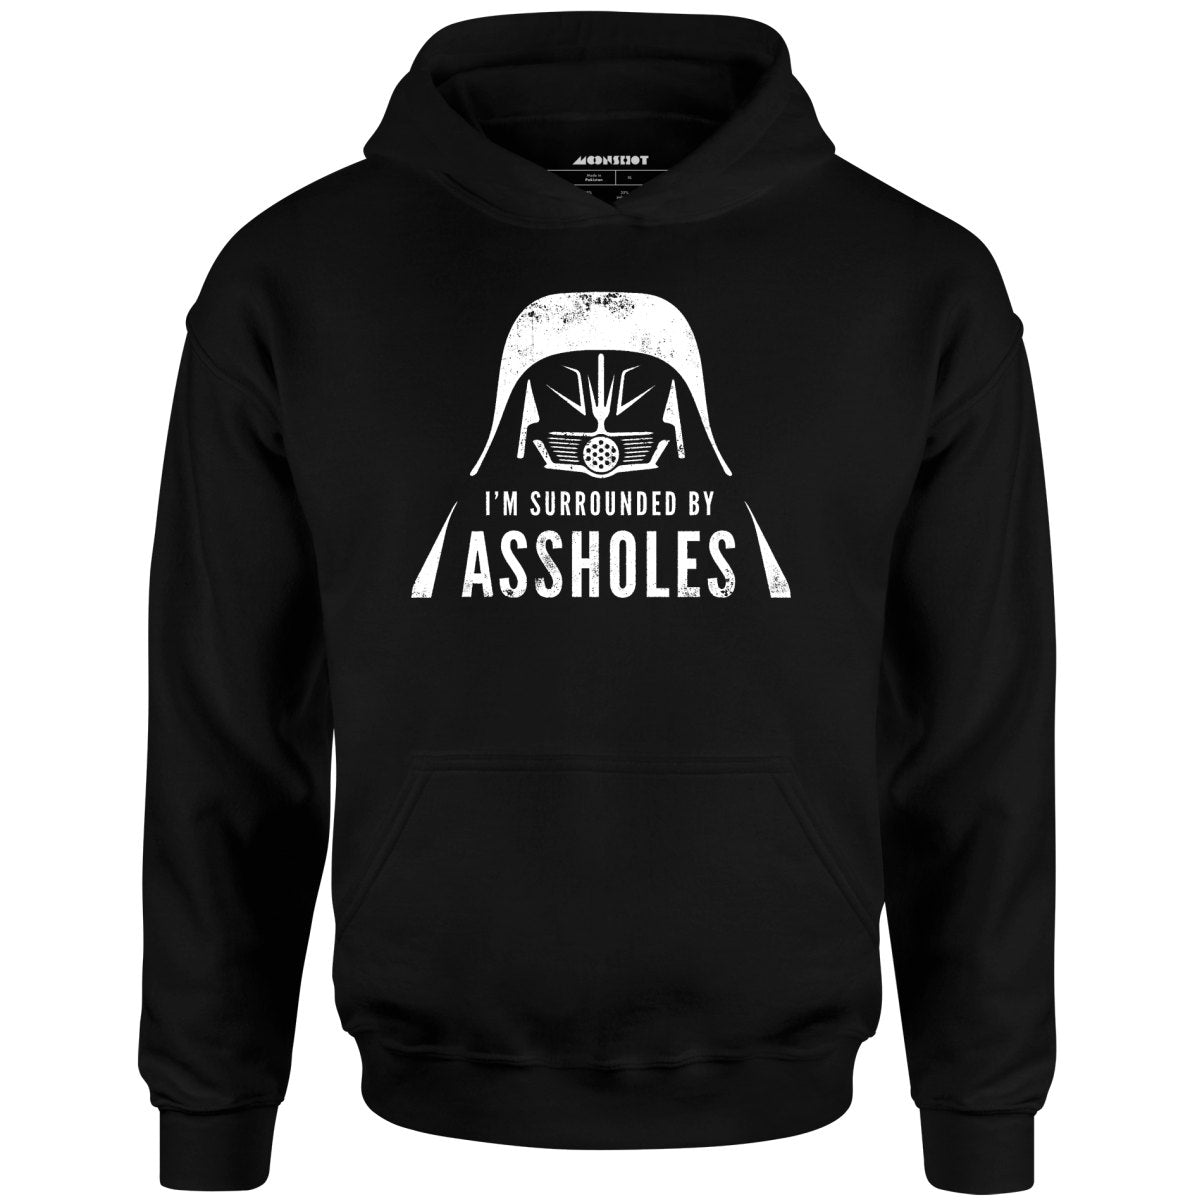 I'm Surrounded By Assholes - Unisex Hoodie